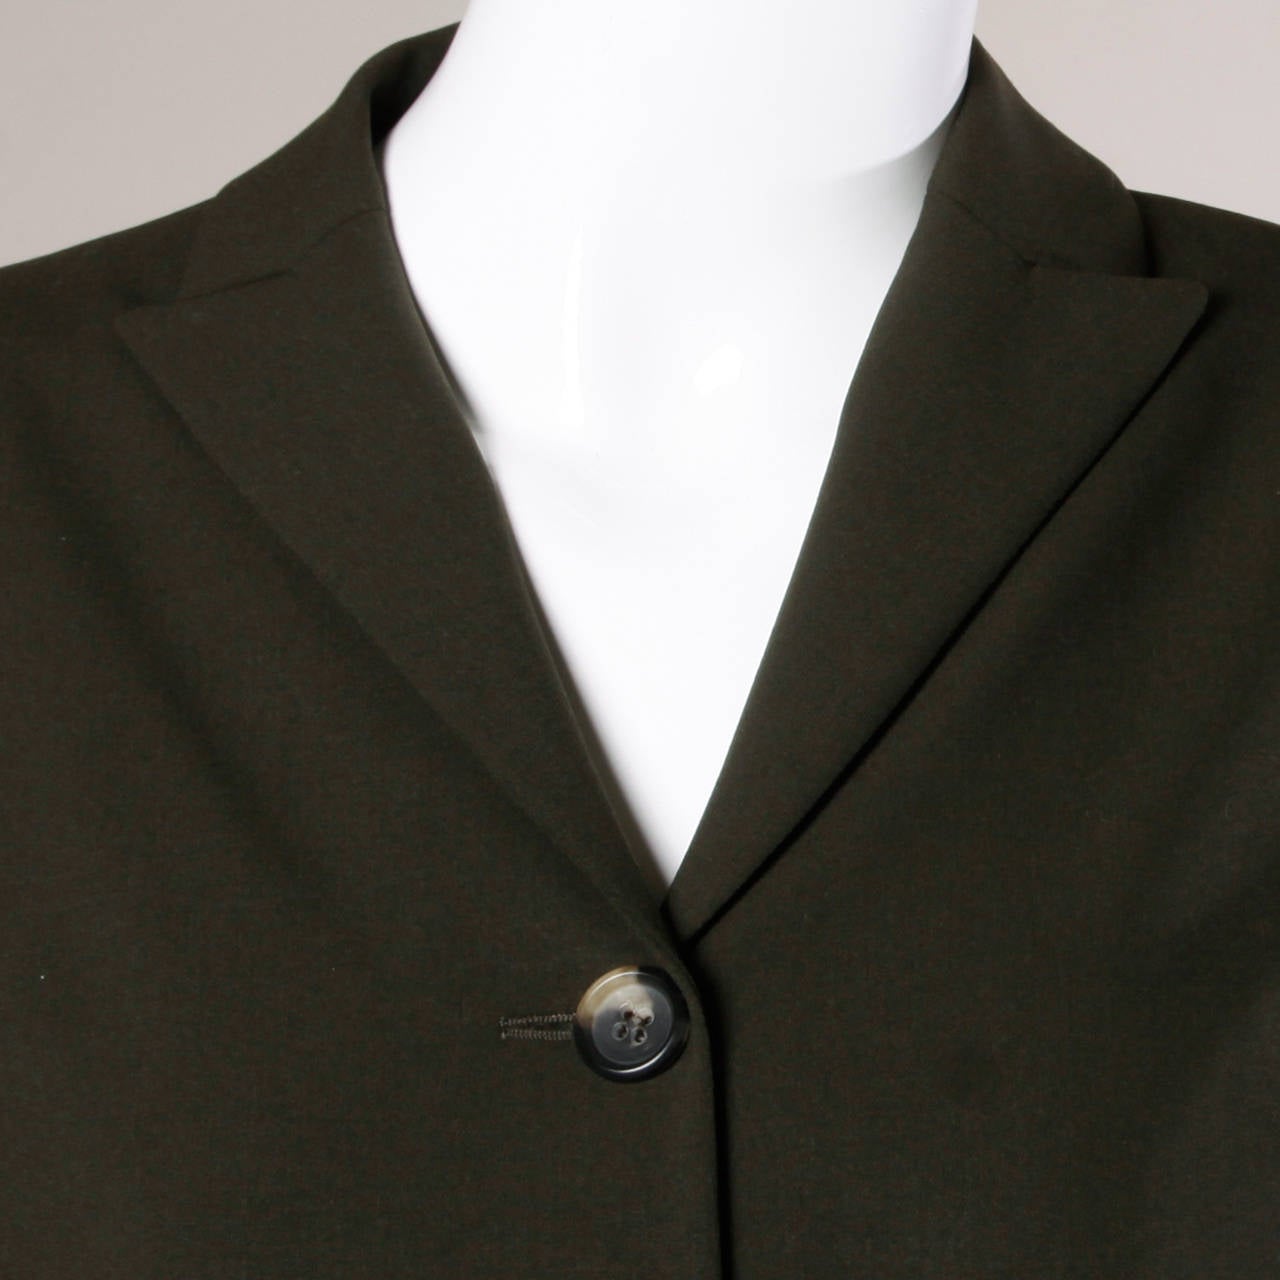 Minimalist dark green wool blazer jacket by Jil Sander.

Details:

Fully Lined
Front Pockets
Shoulder Pads Are Sewn Into Lining
Front Button Closure
Marked Size: 34
Color: Dark Green
Fabric: 96% Wool and 4% Elastic/ 55% Viscose and 45%